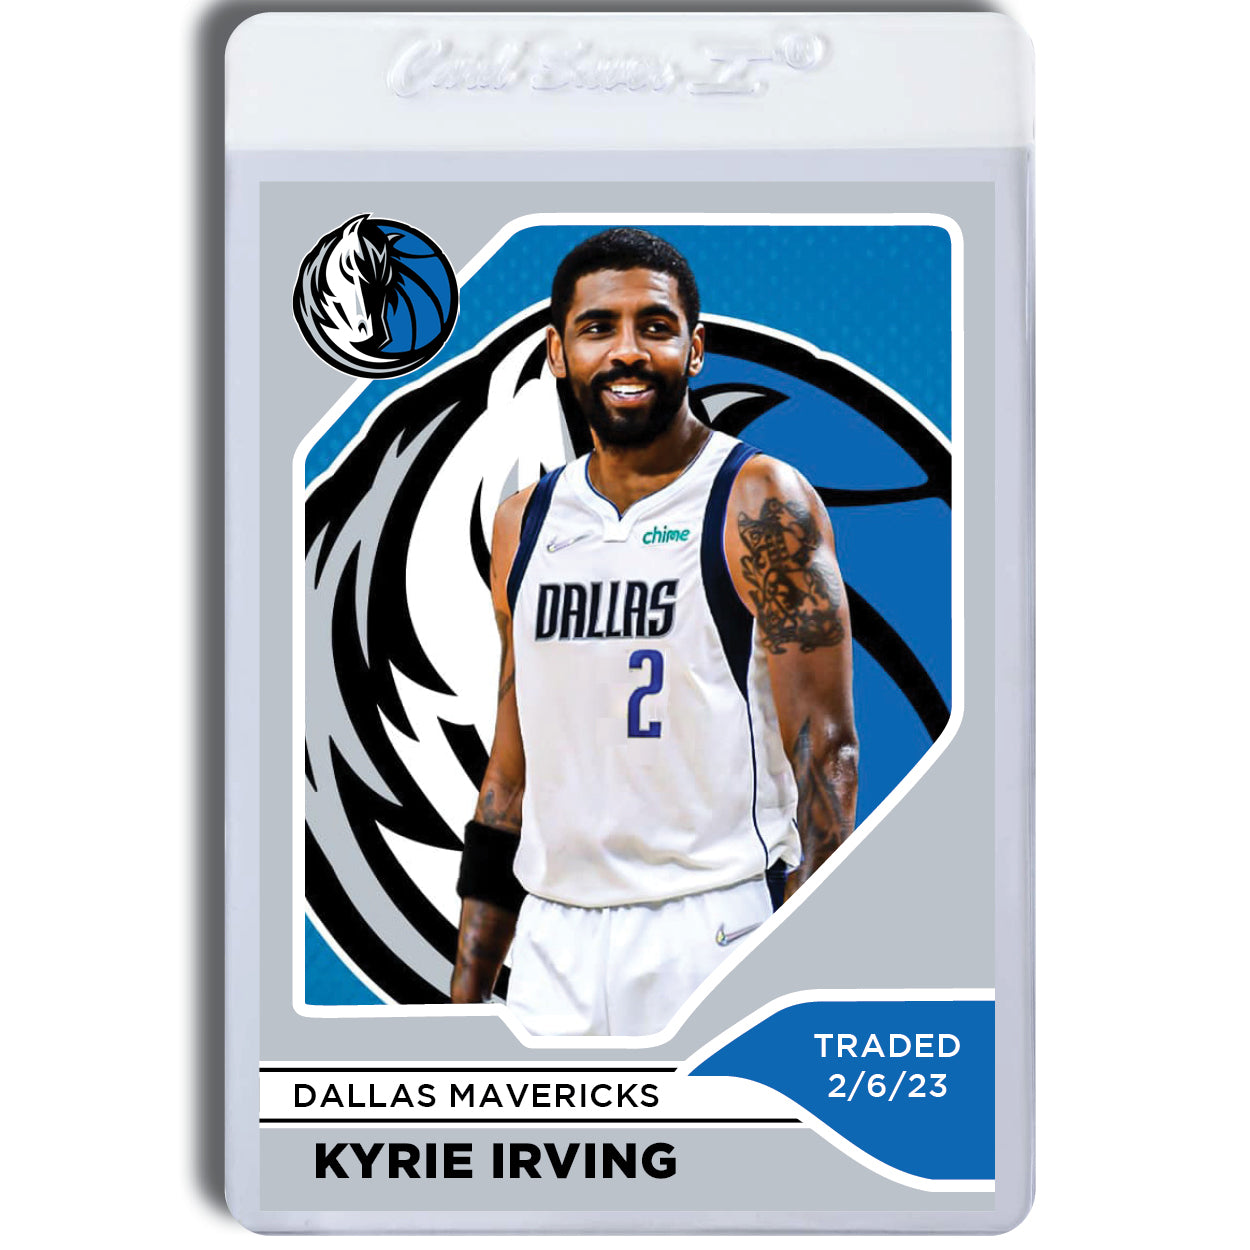 Order your Kyrie Irving Dallas Mavericks jersey today